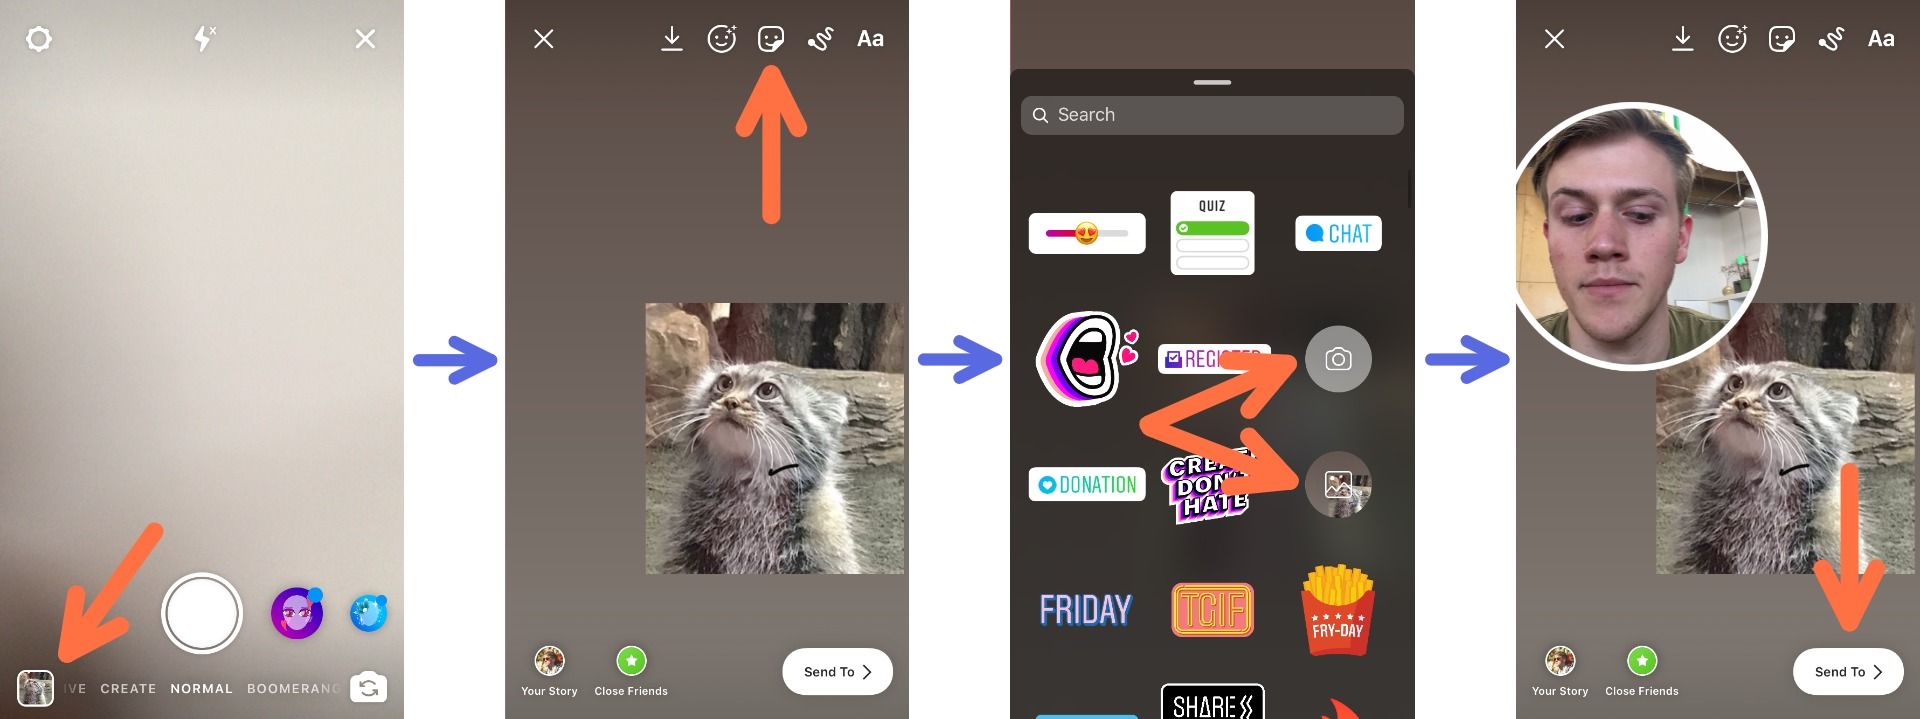 How to Add Multiple Images to Your Instagram Story